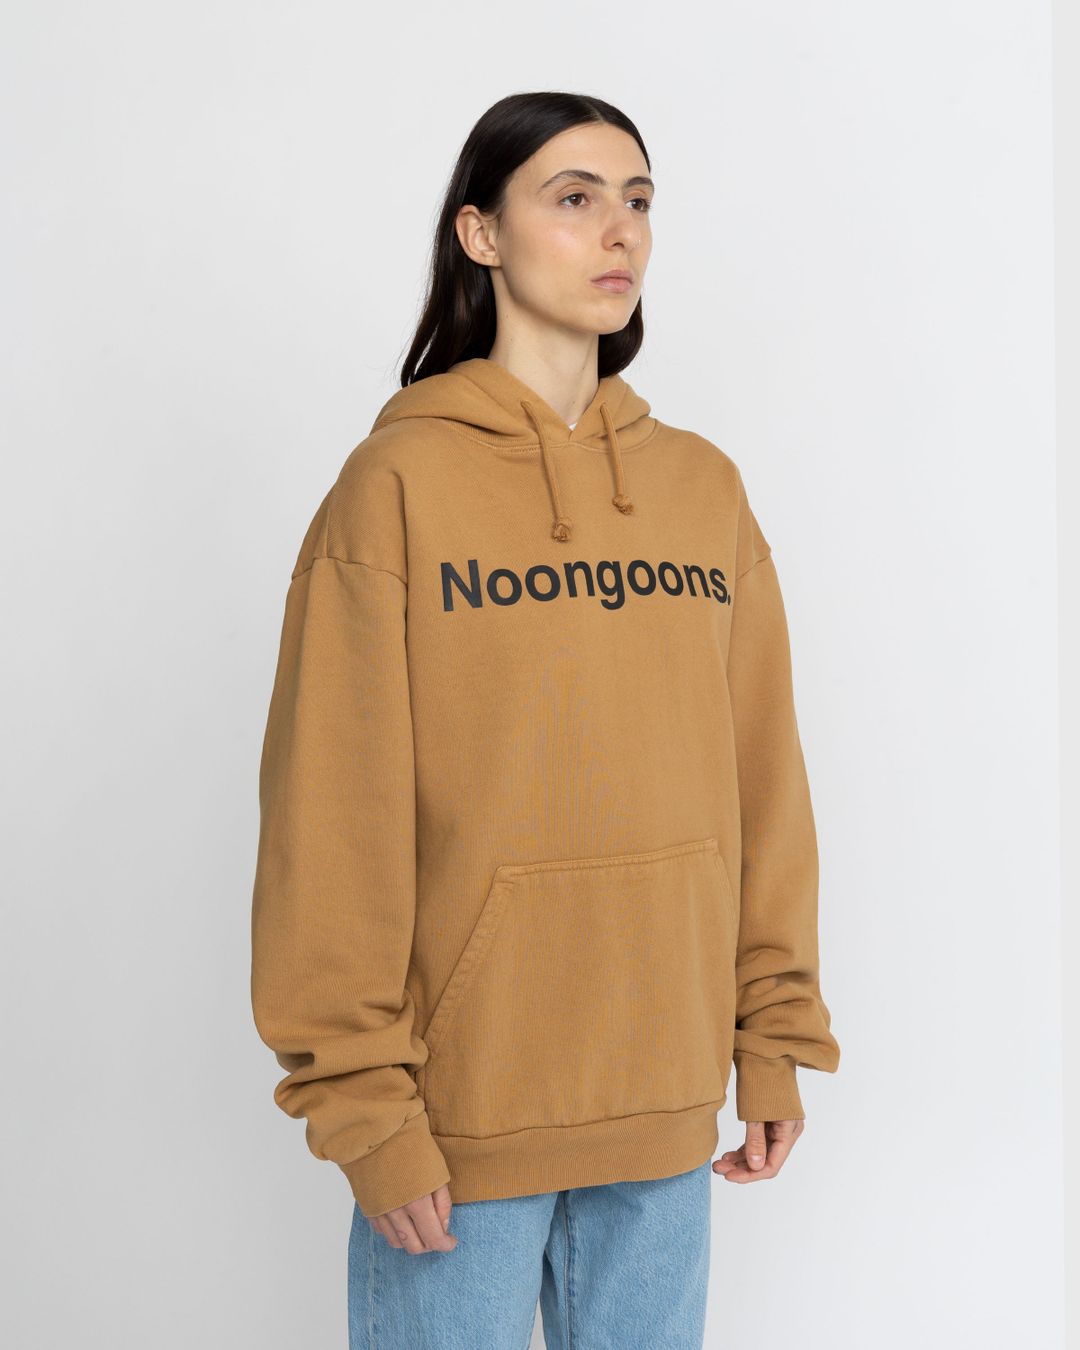 Noon Goons – Here To Stay Hoodie Brown | Highsnobiety Shop